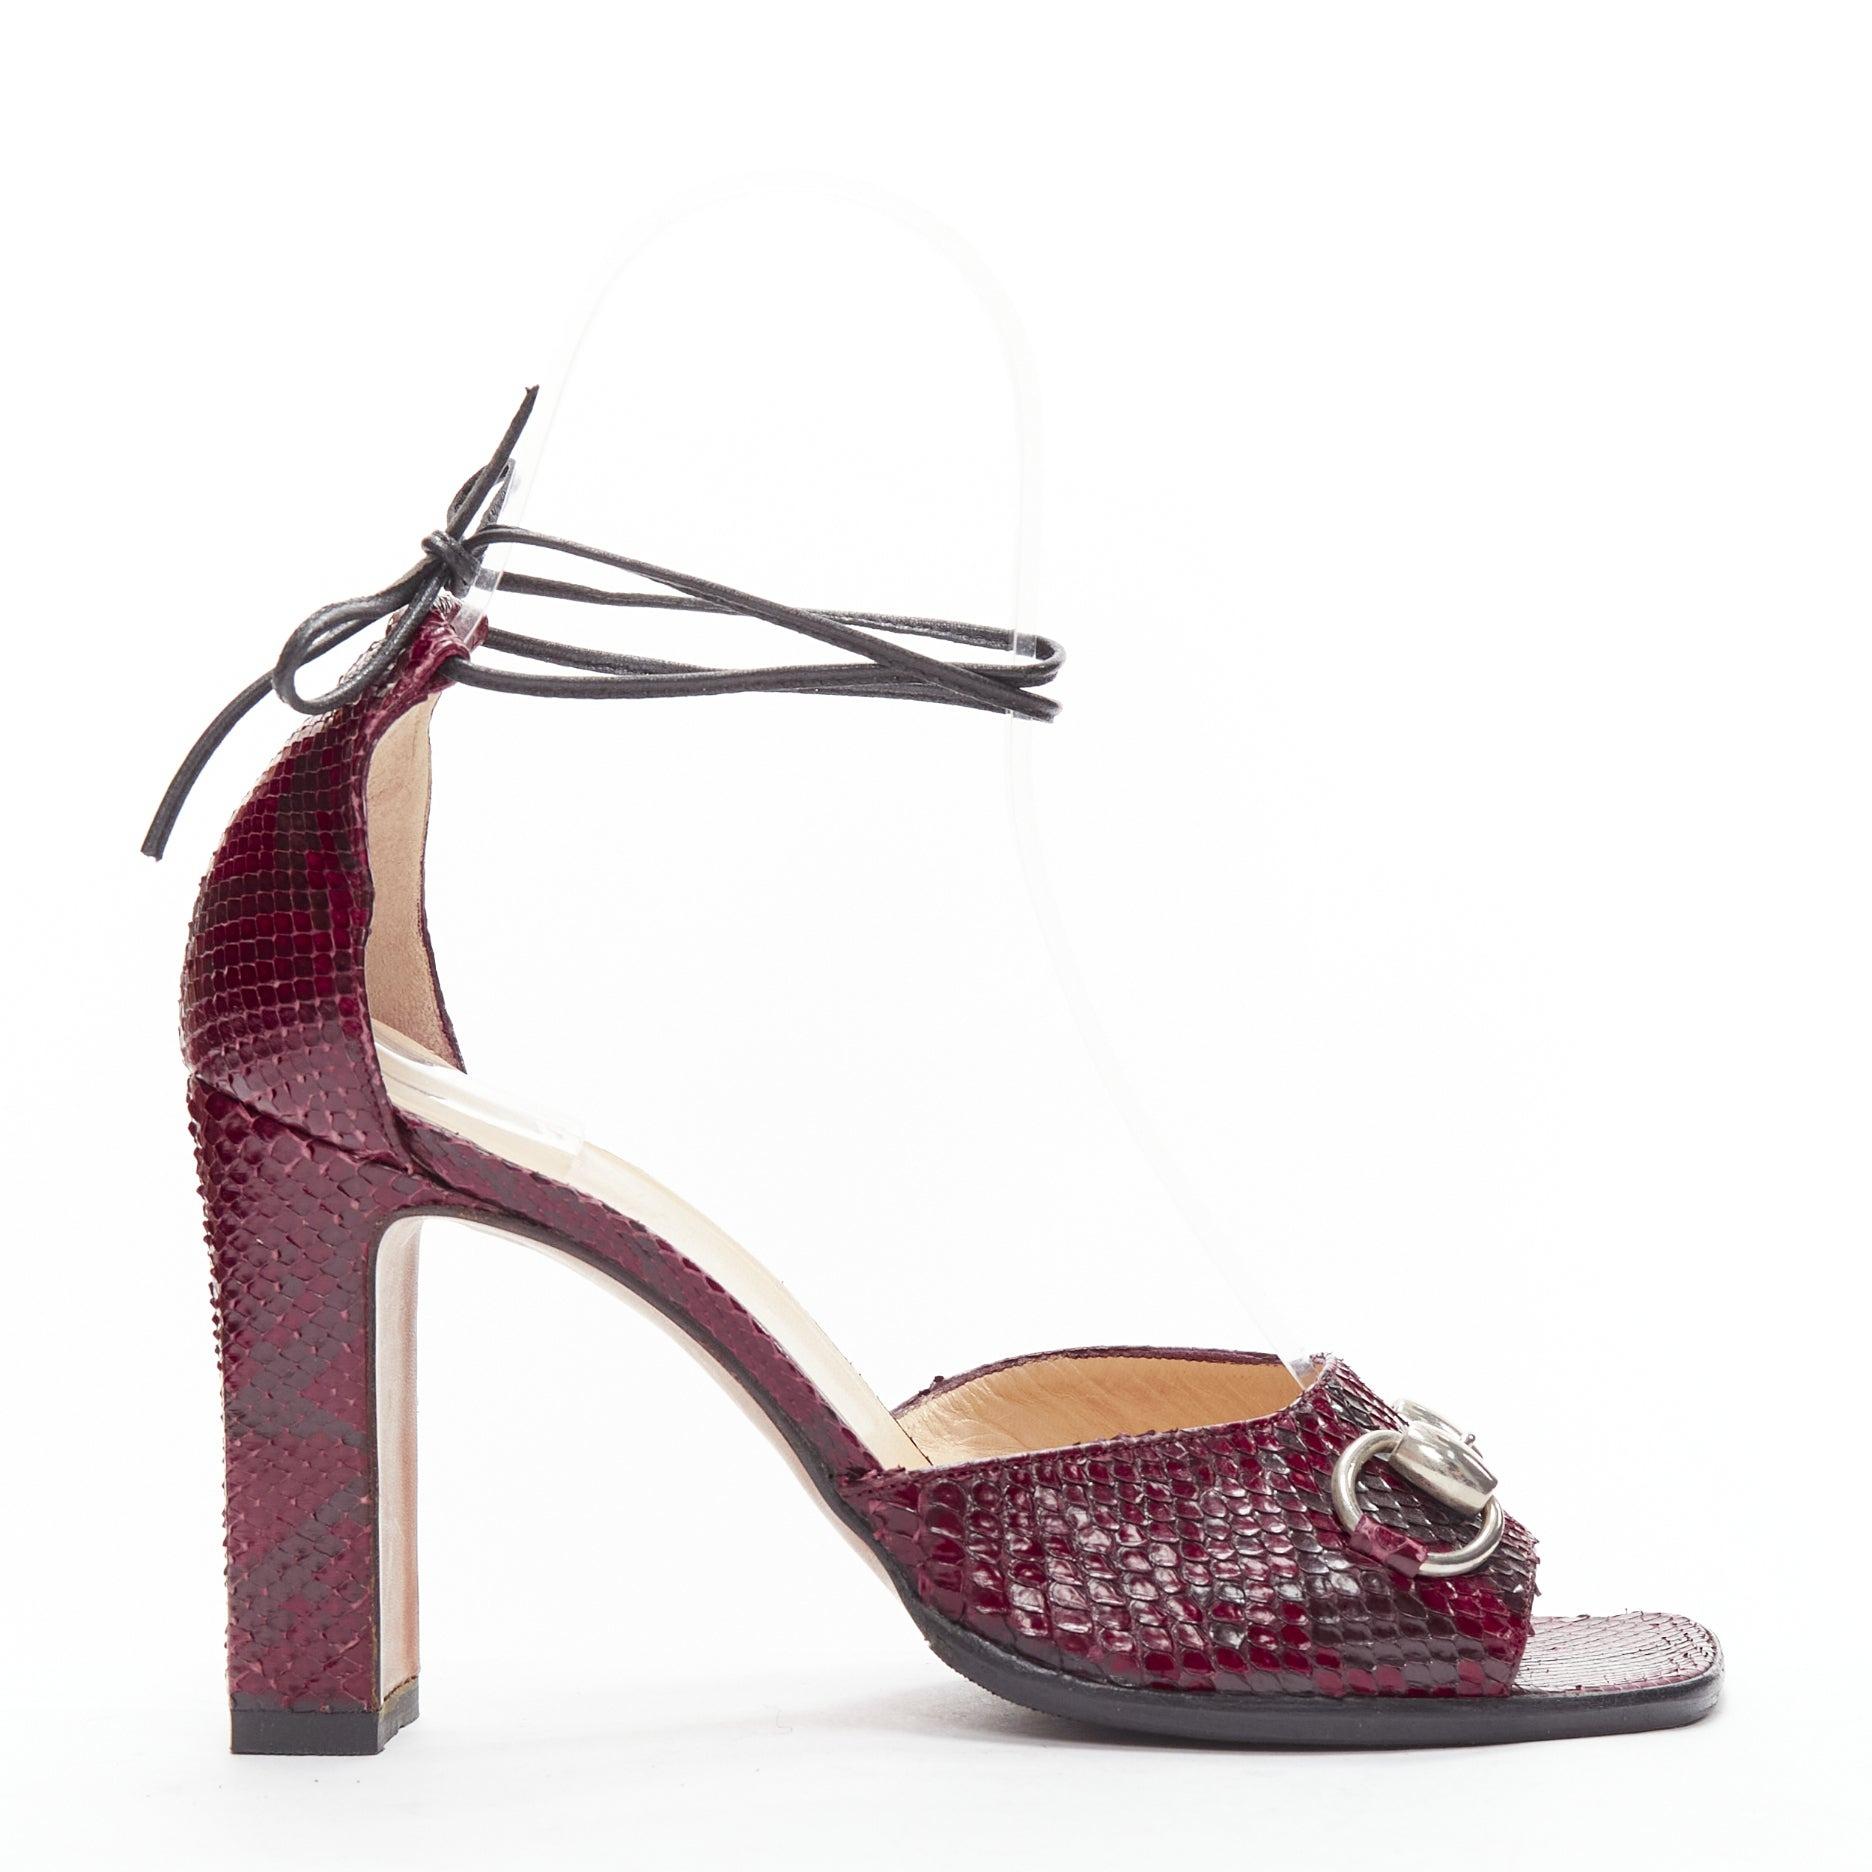 GUCCI Tom Ford Vintage 1996 red scaled leather silver Horsebit heels EU37
Reference: GIYG/A00373
Brand: Gucci
Designer: Tom Ford
Collection: SS1996
Material: Leather
Color: Burgundy
Pattern: Animal Print
Closure: Ankle Tie
Lining: Nude Leather
Extra